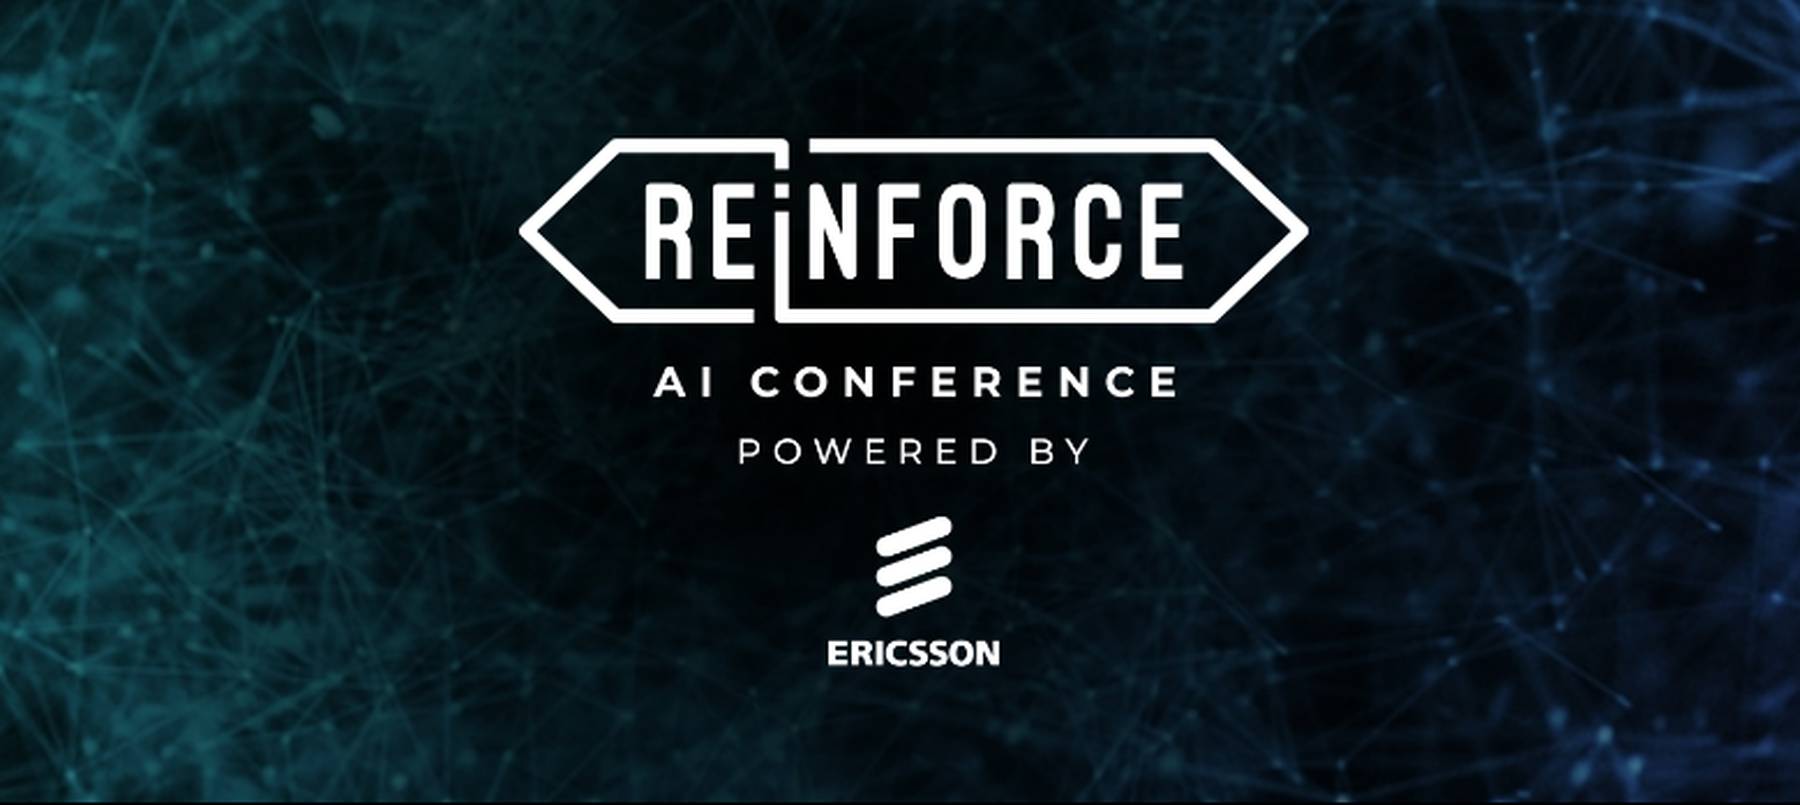 Reinforce Conference 2021 AI & ML Events